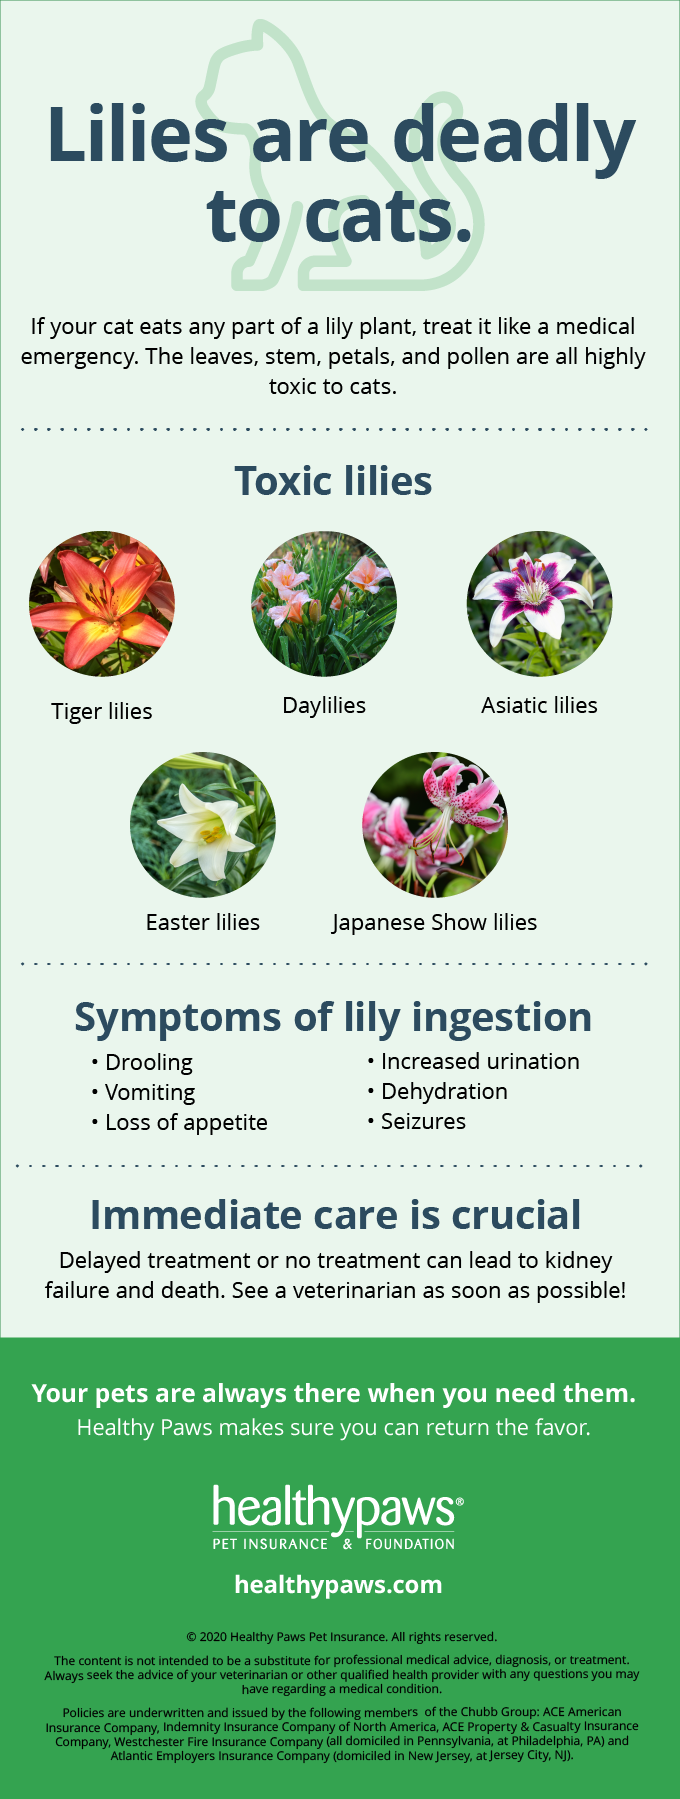 Lilies Are Deadly to Cats